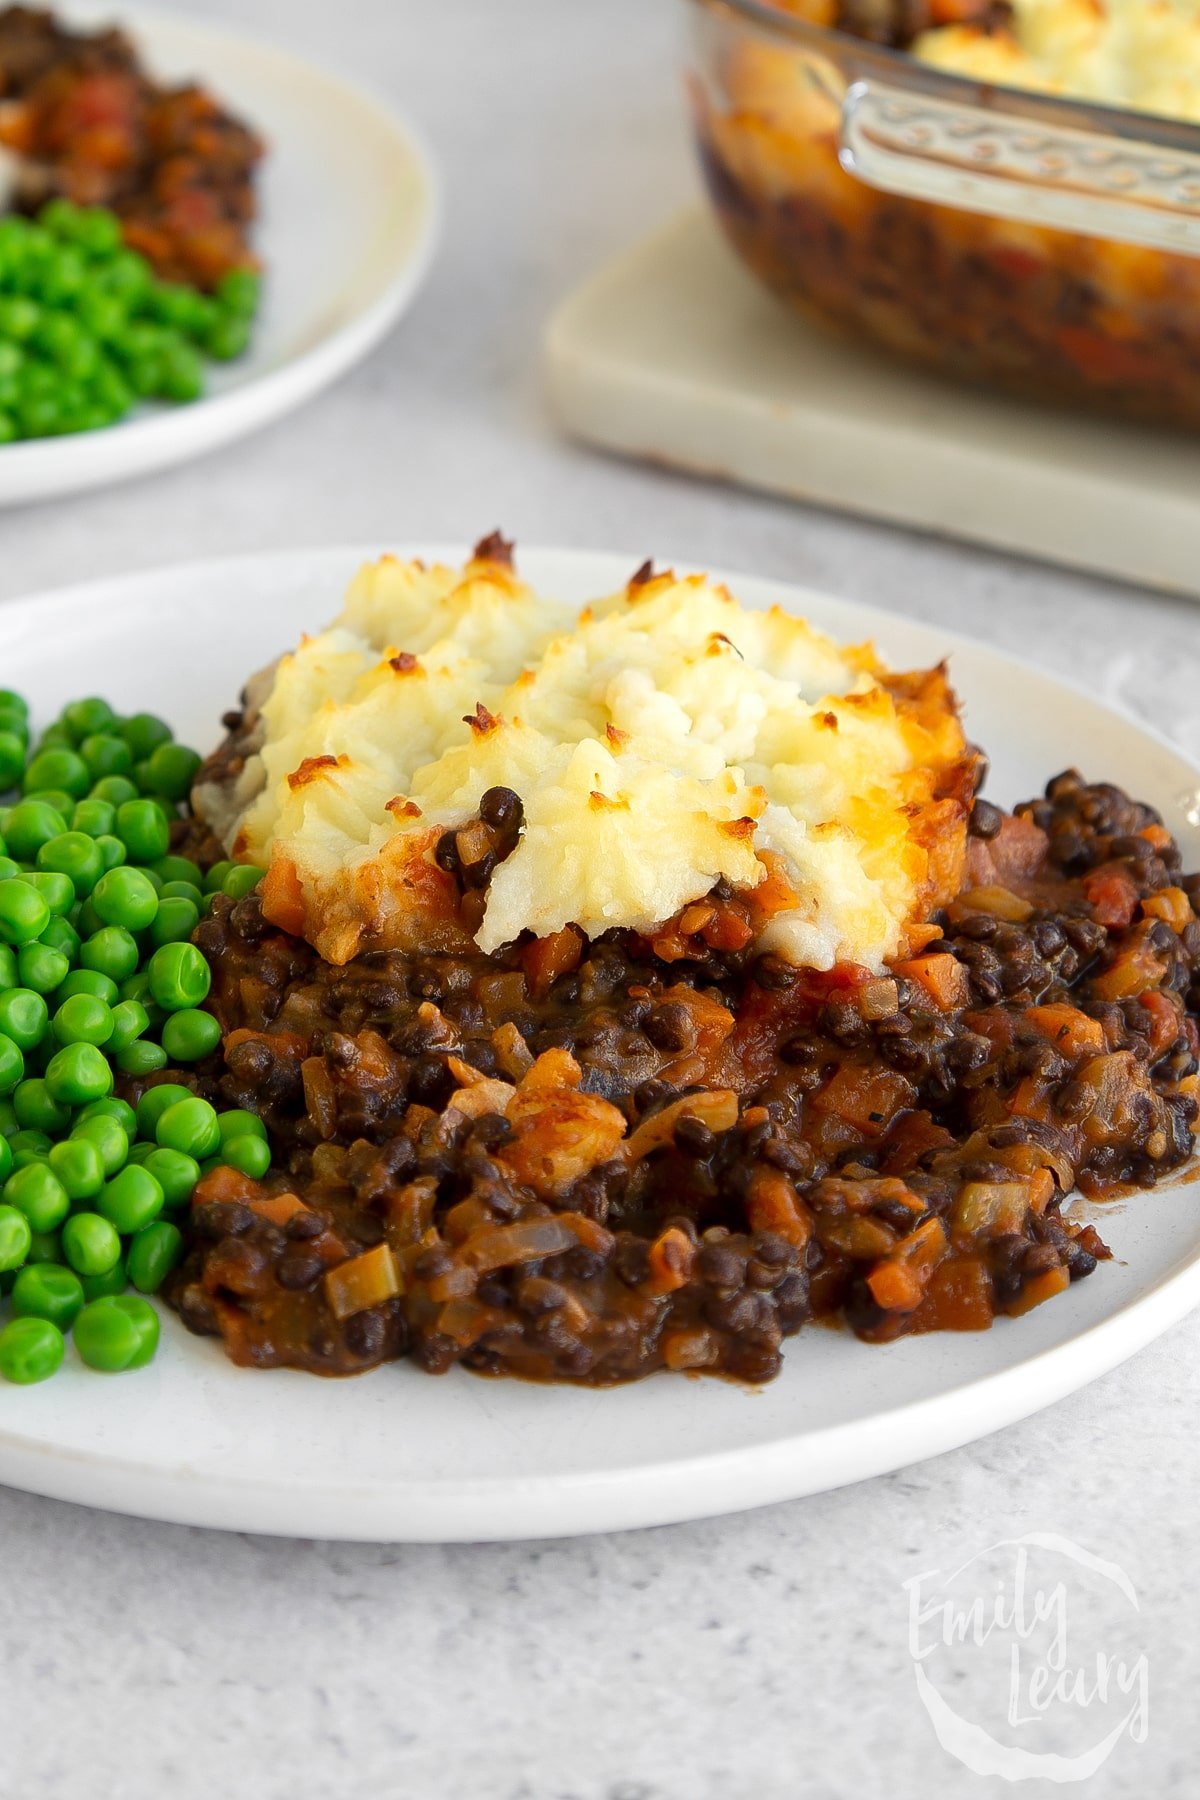 A piece of Vegetarian shepherd's pie on a white plate with peas.